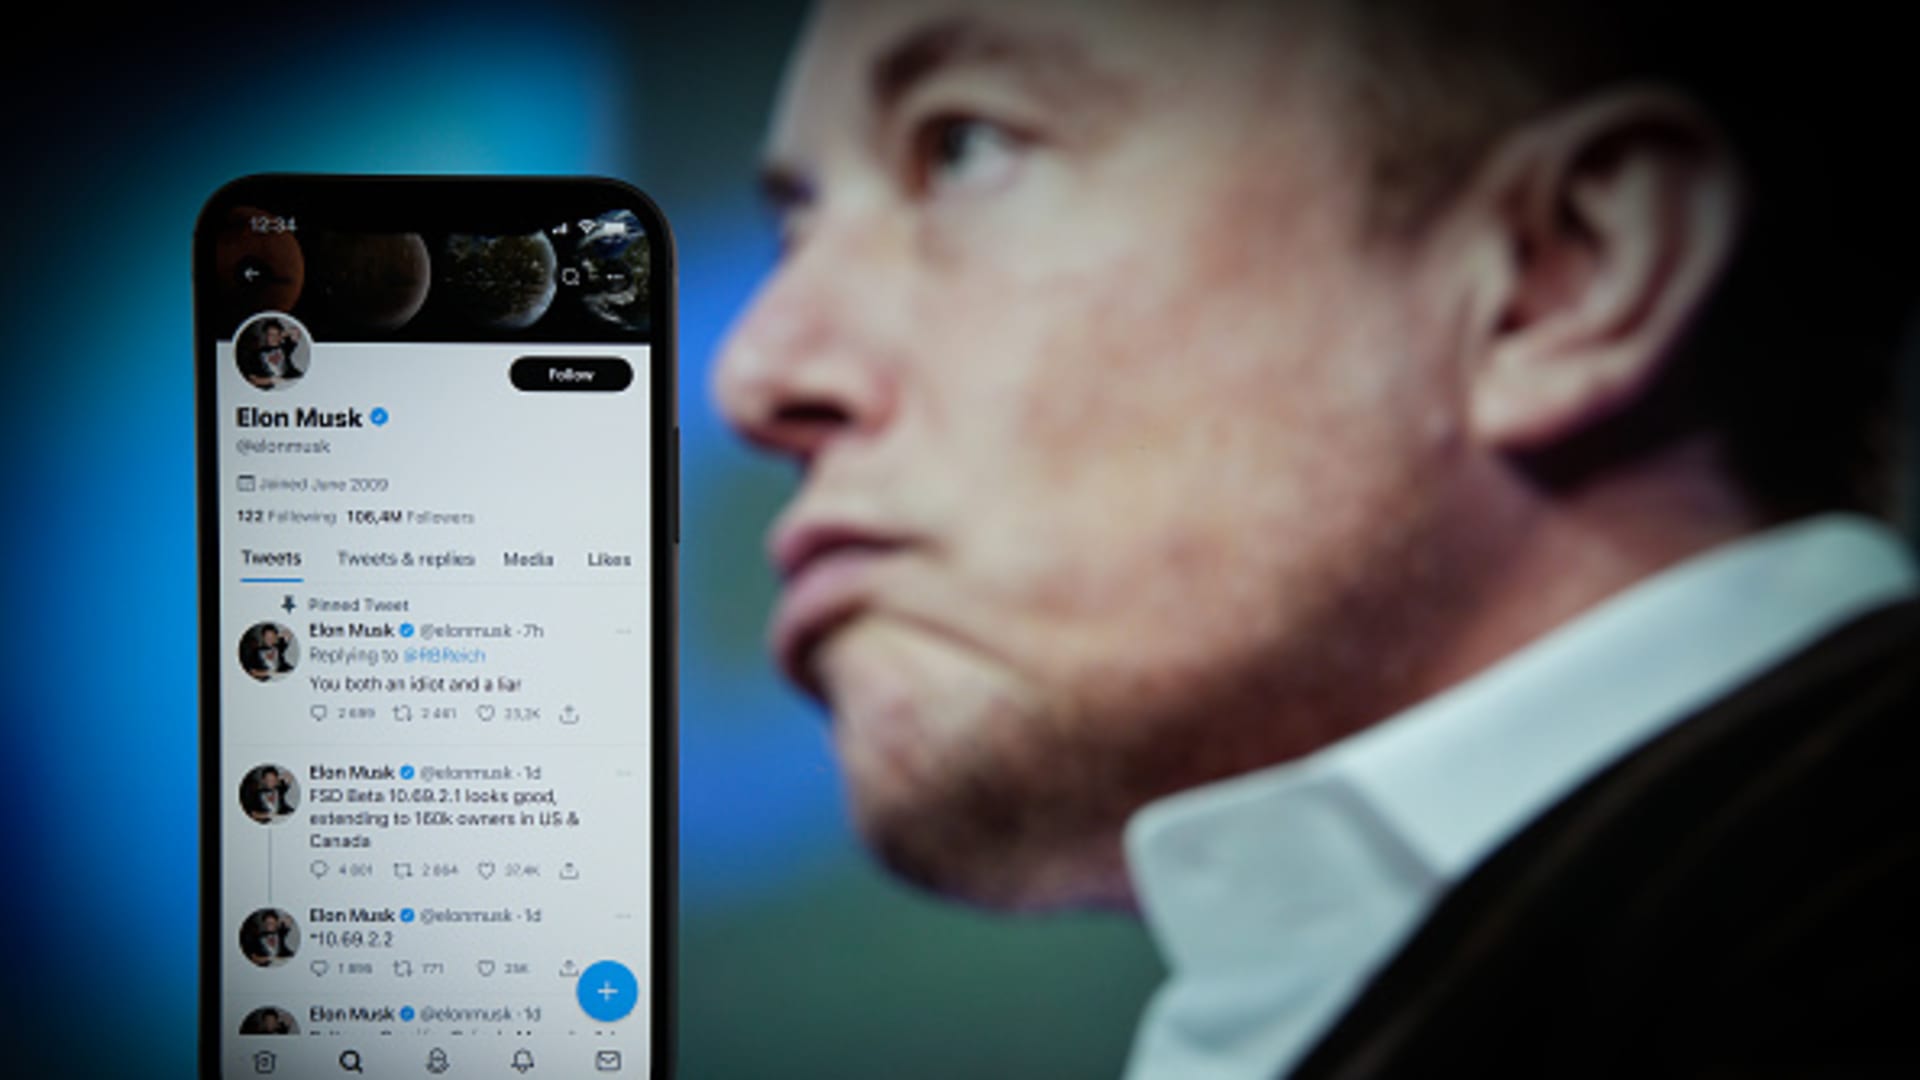 Twitter cut more than 950 jobs in California after Elon Musk took over, WARN notice shows